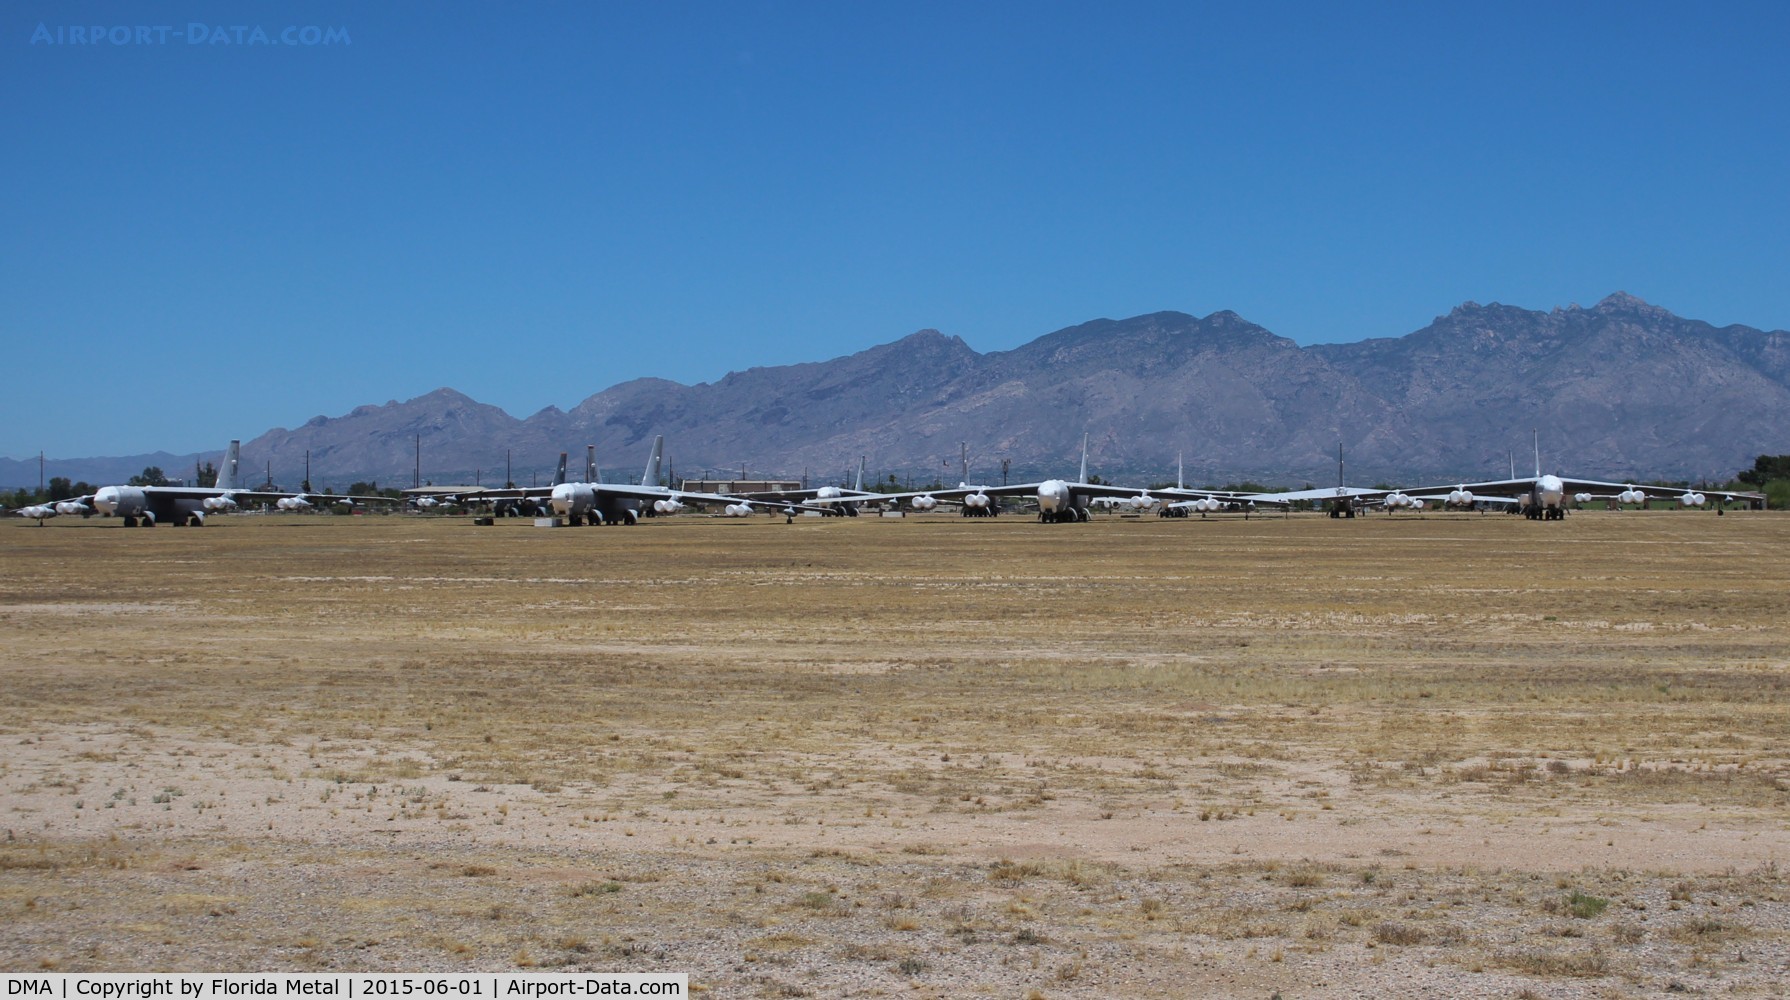 Davis Monthan Afb Airport (DMA) - B-52s lined up in the boneyard